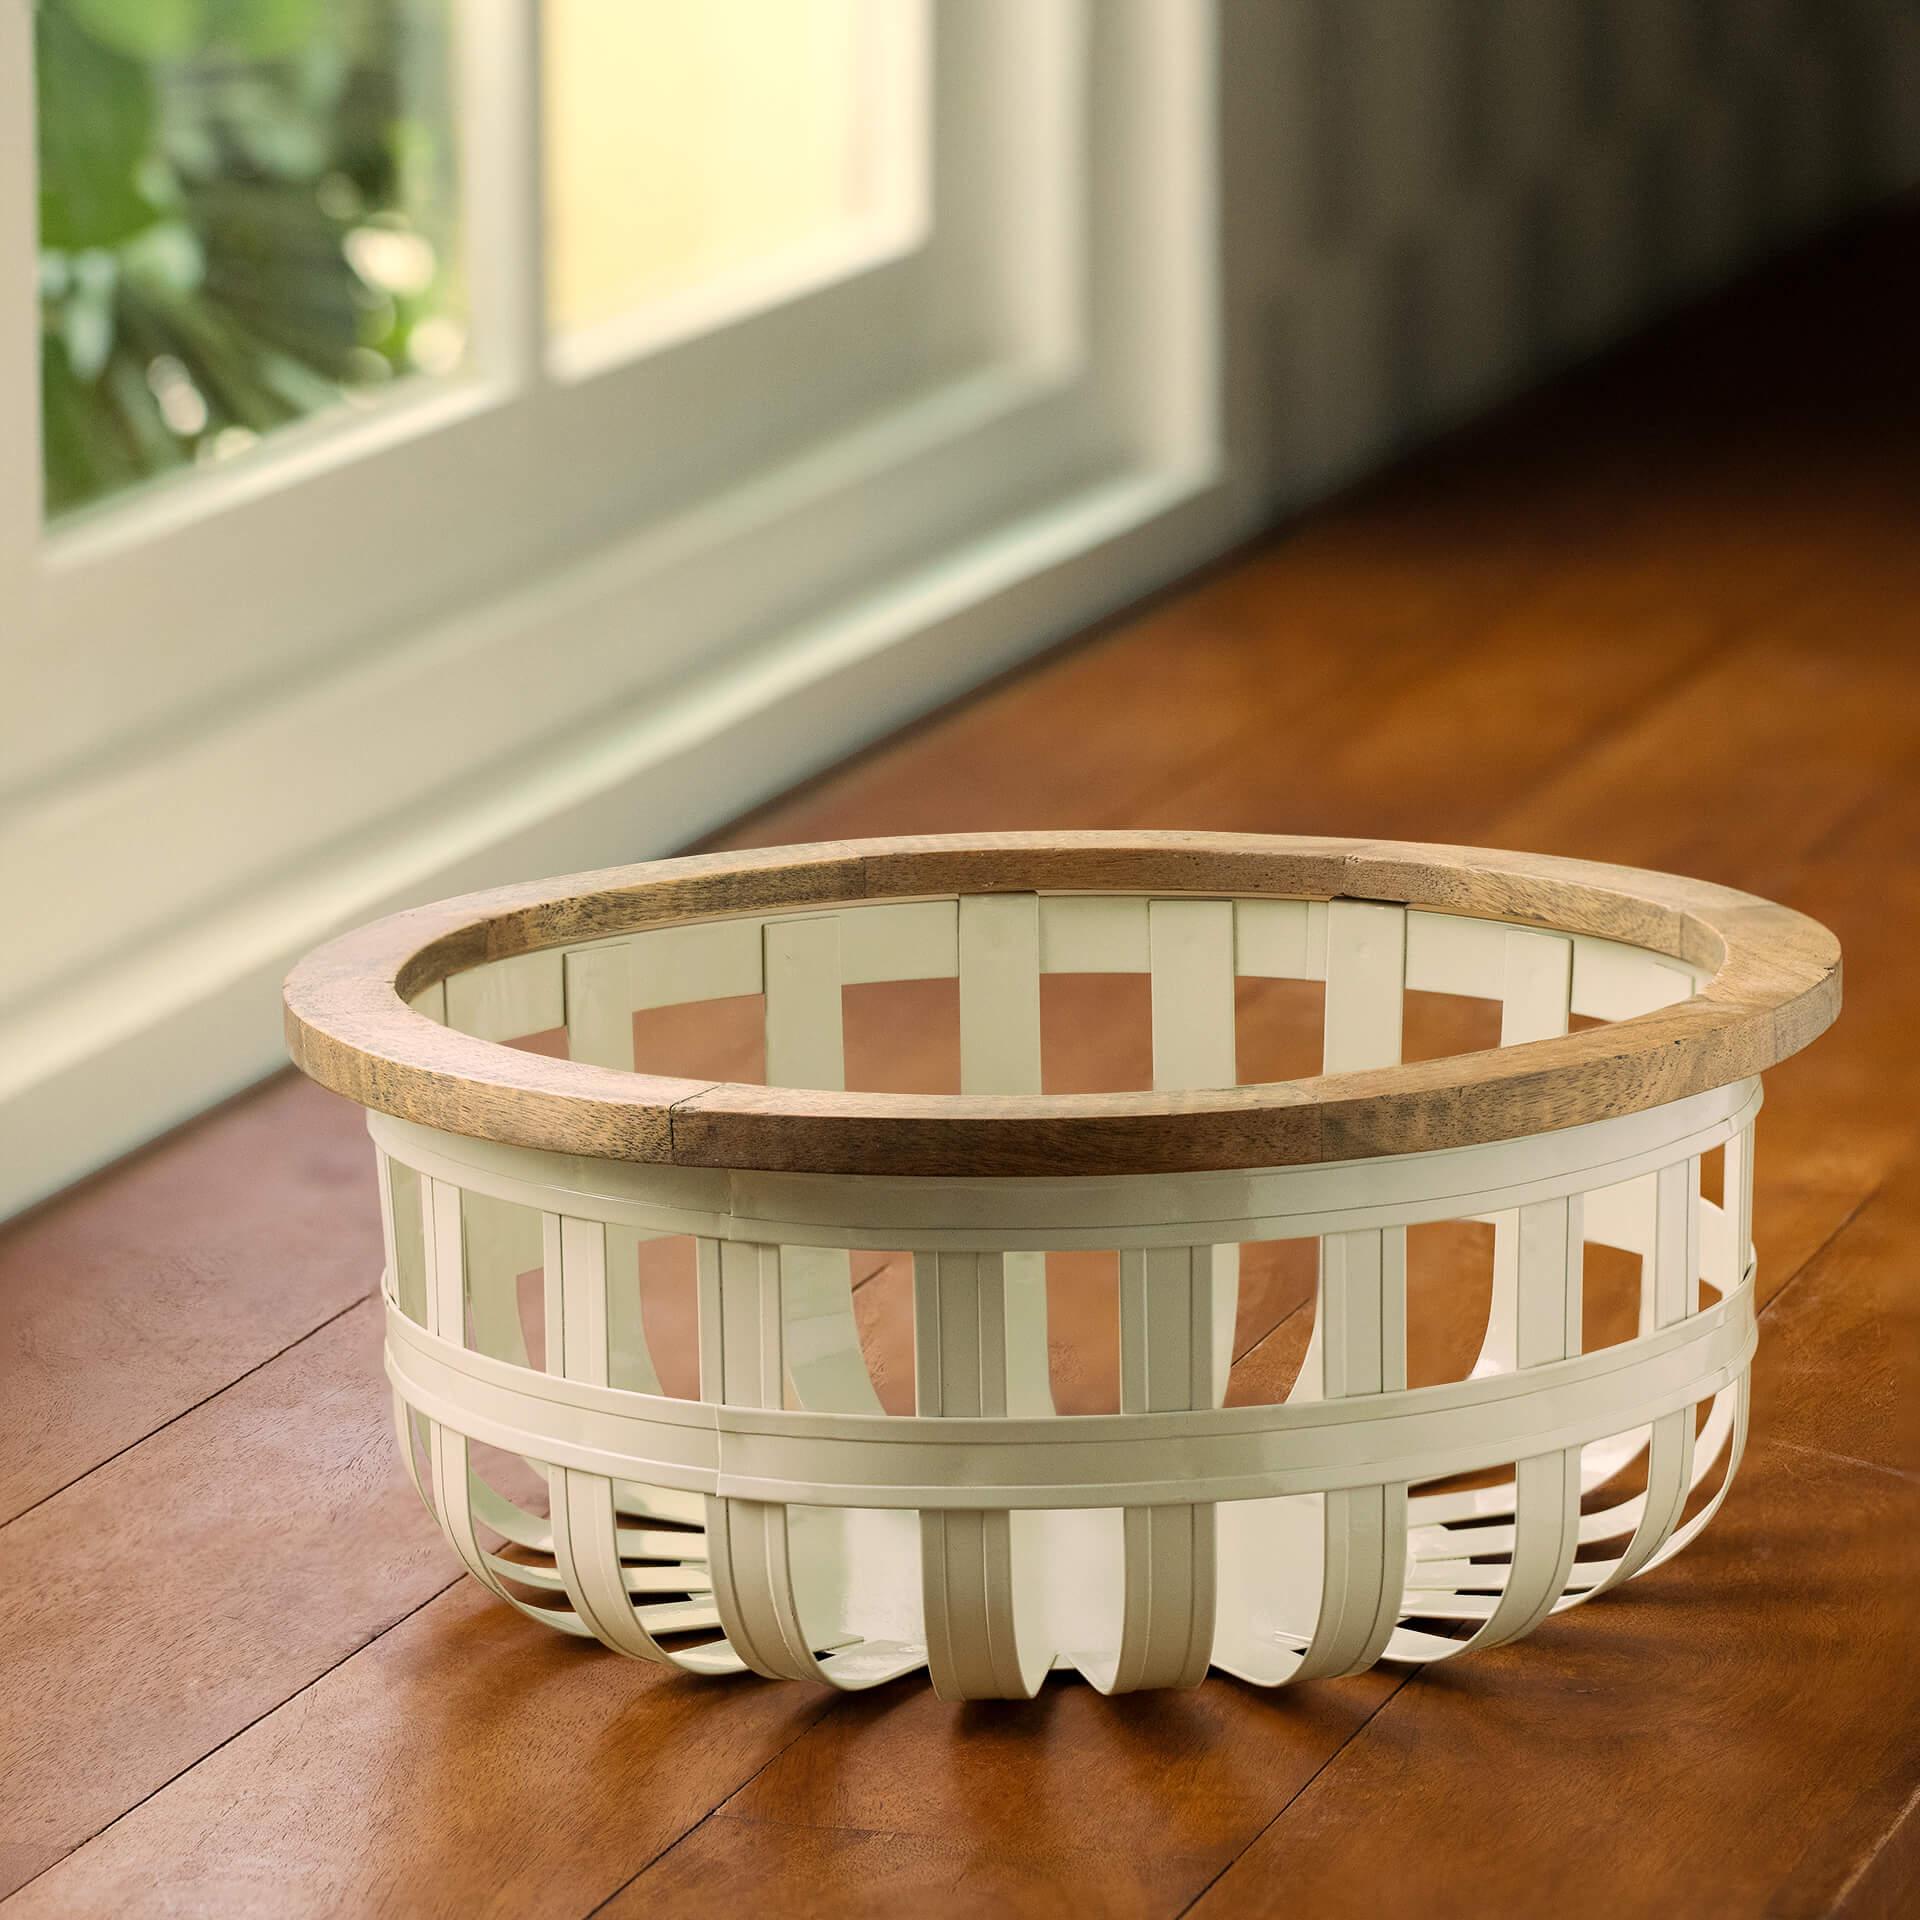 egg shell round metal basket with wooden trim small